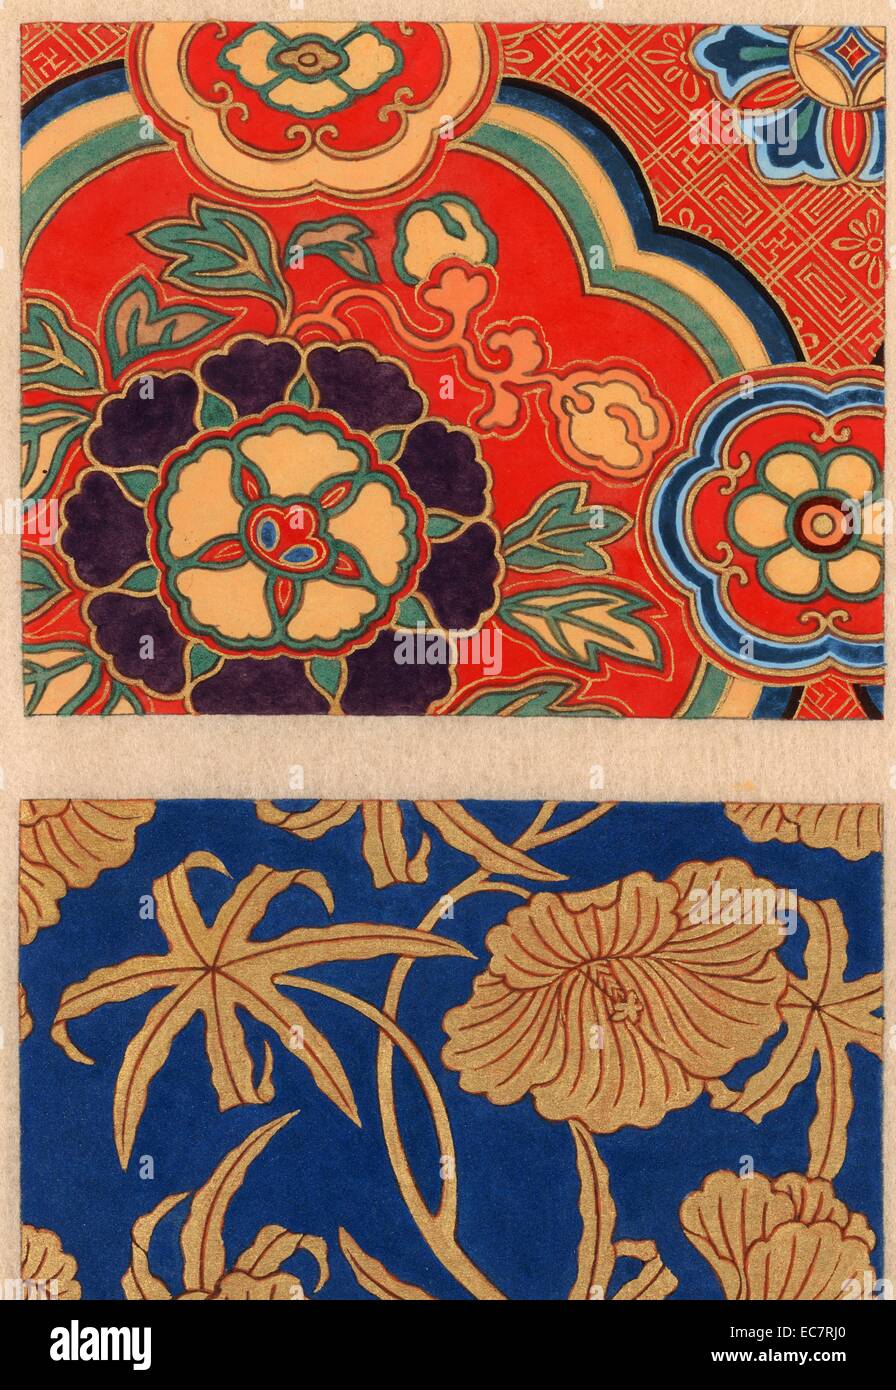 Kara nishiki (Chinese brocade) with red background] [Kinran (gold brocade) with hollyhock on blue background] Stock Photo